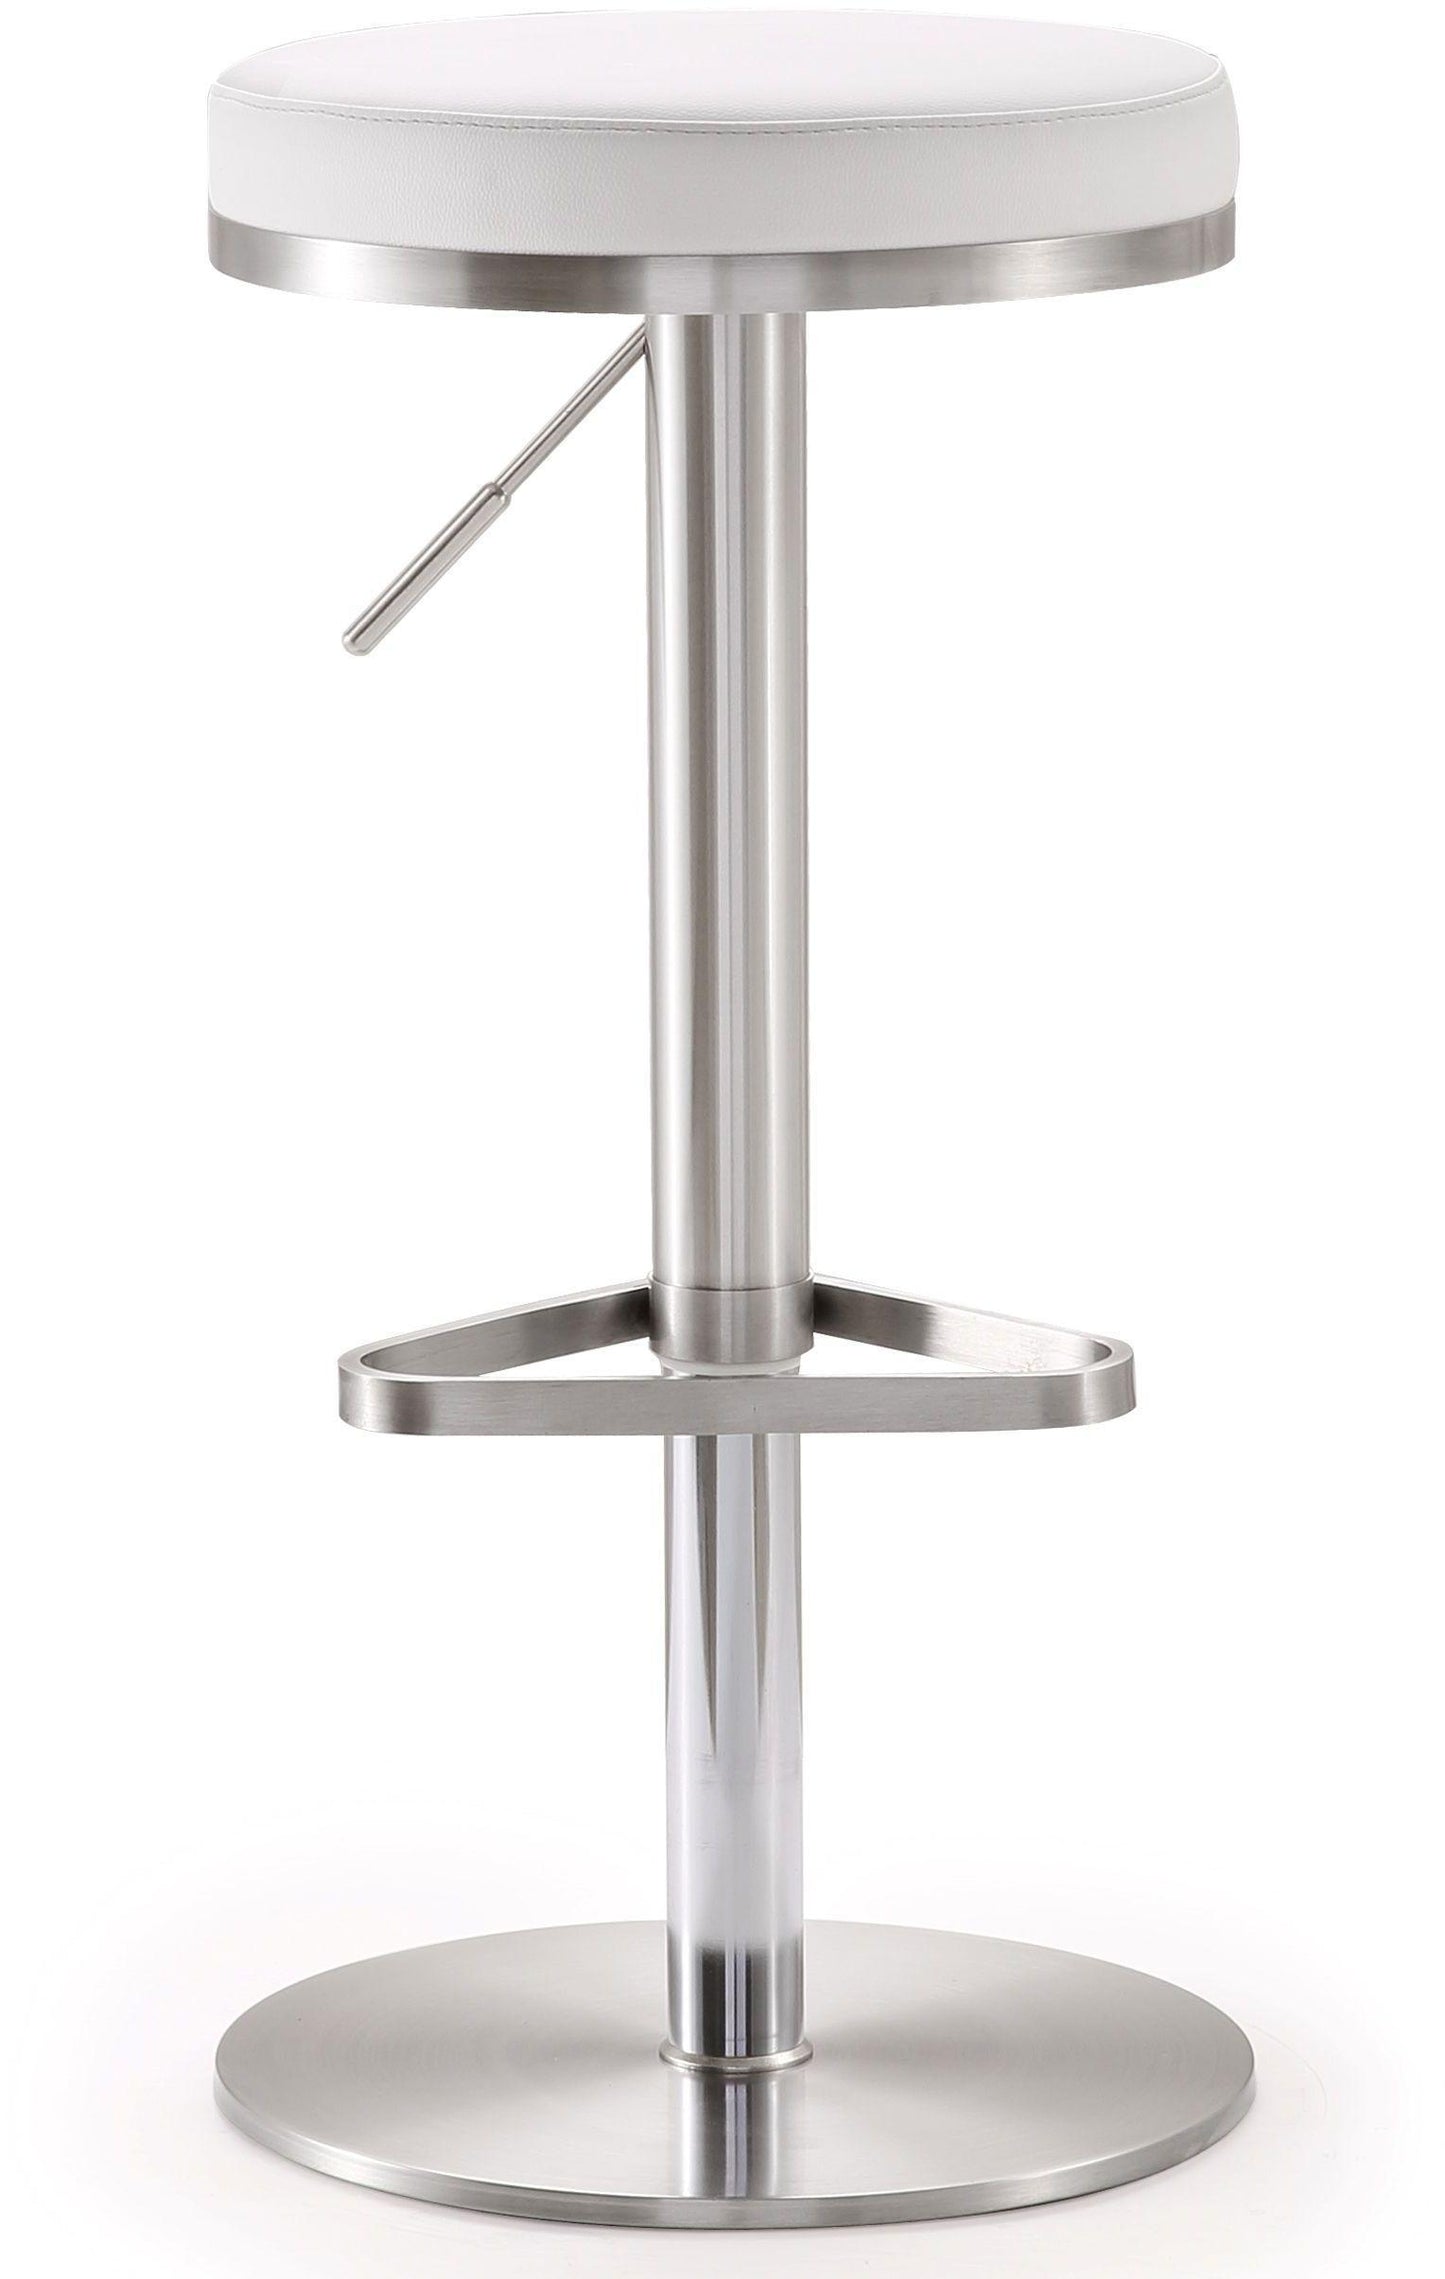 Fano - Stainless Steel Barstool